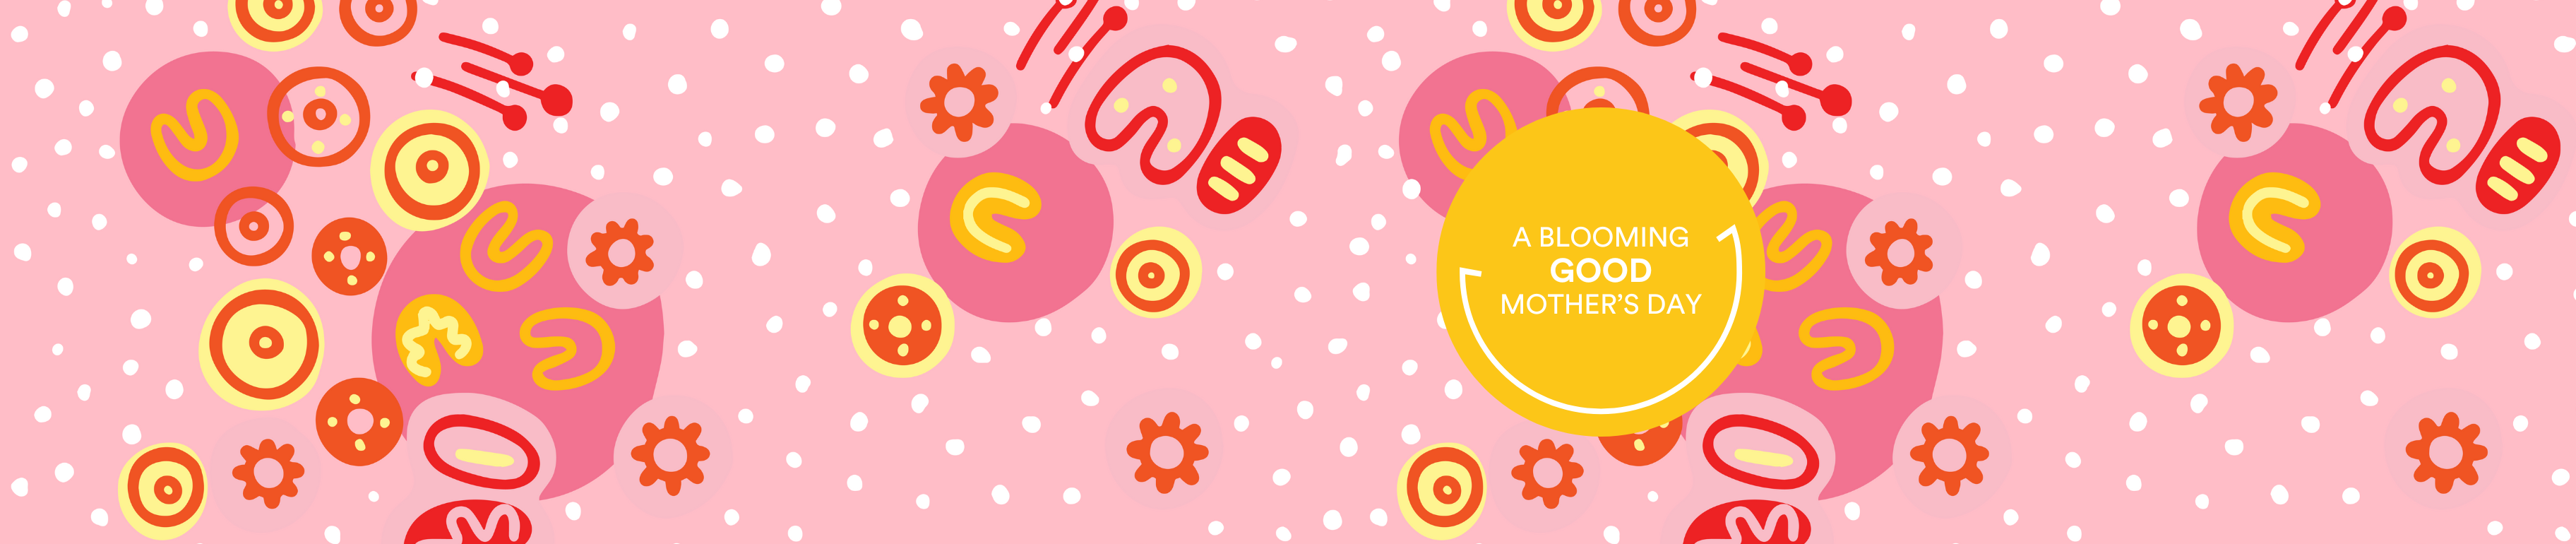 AW24 Mother's Day Web Hero Banner 3648x770px (1).png